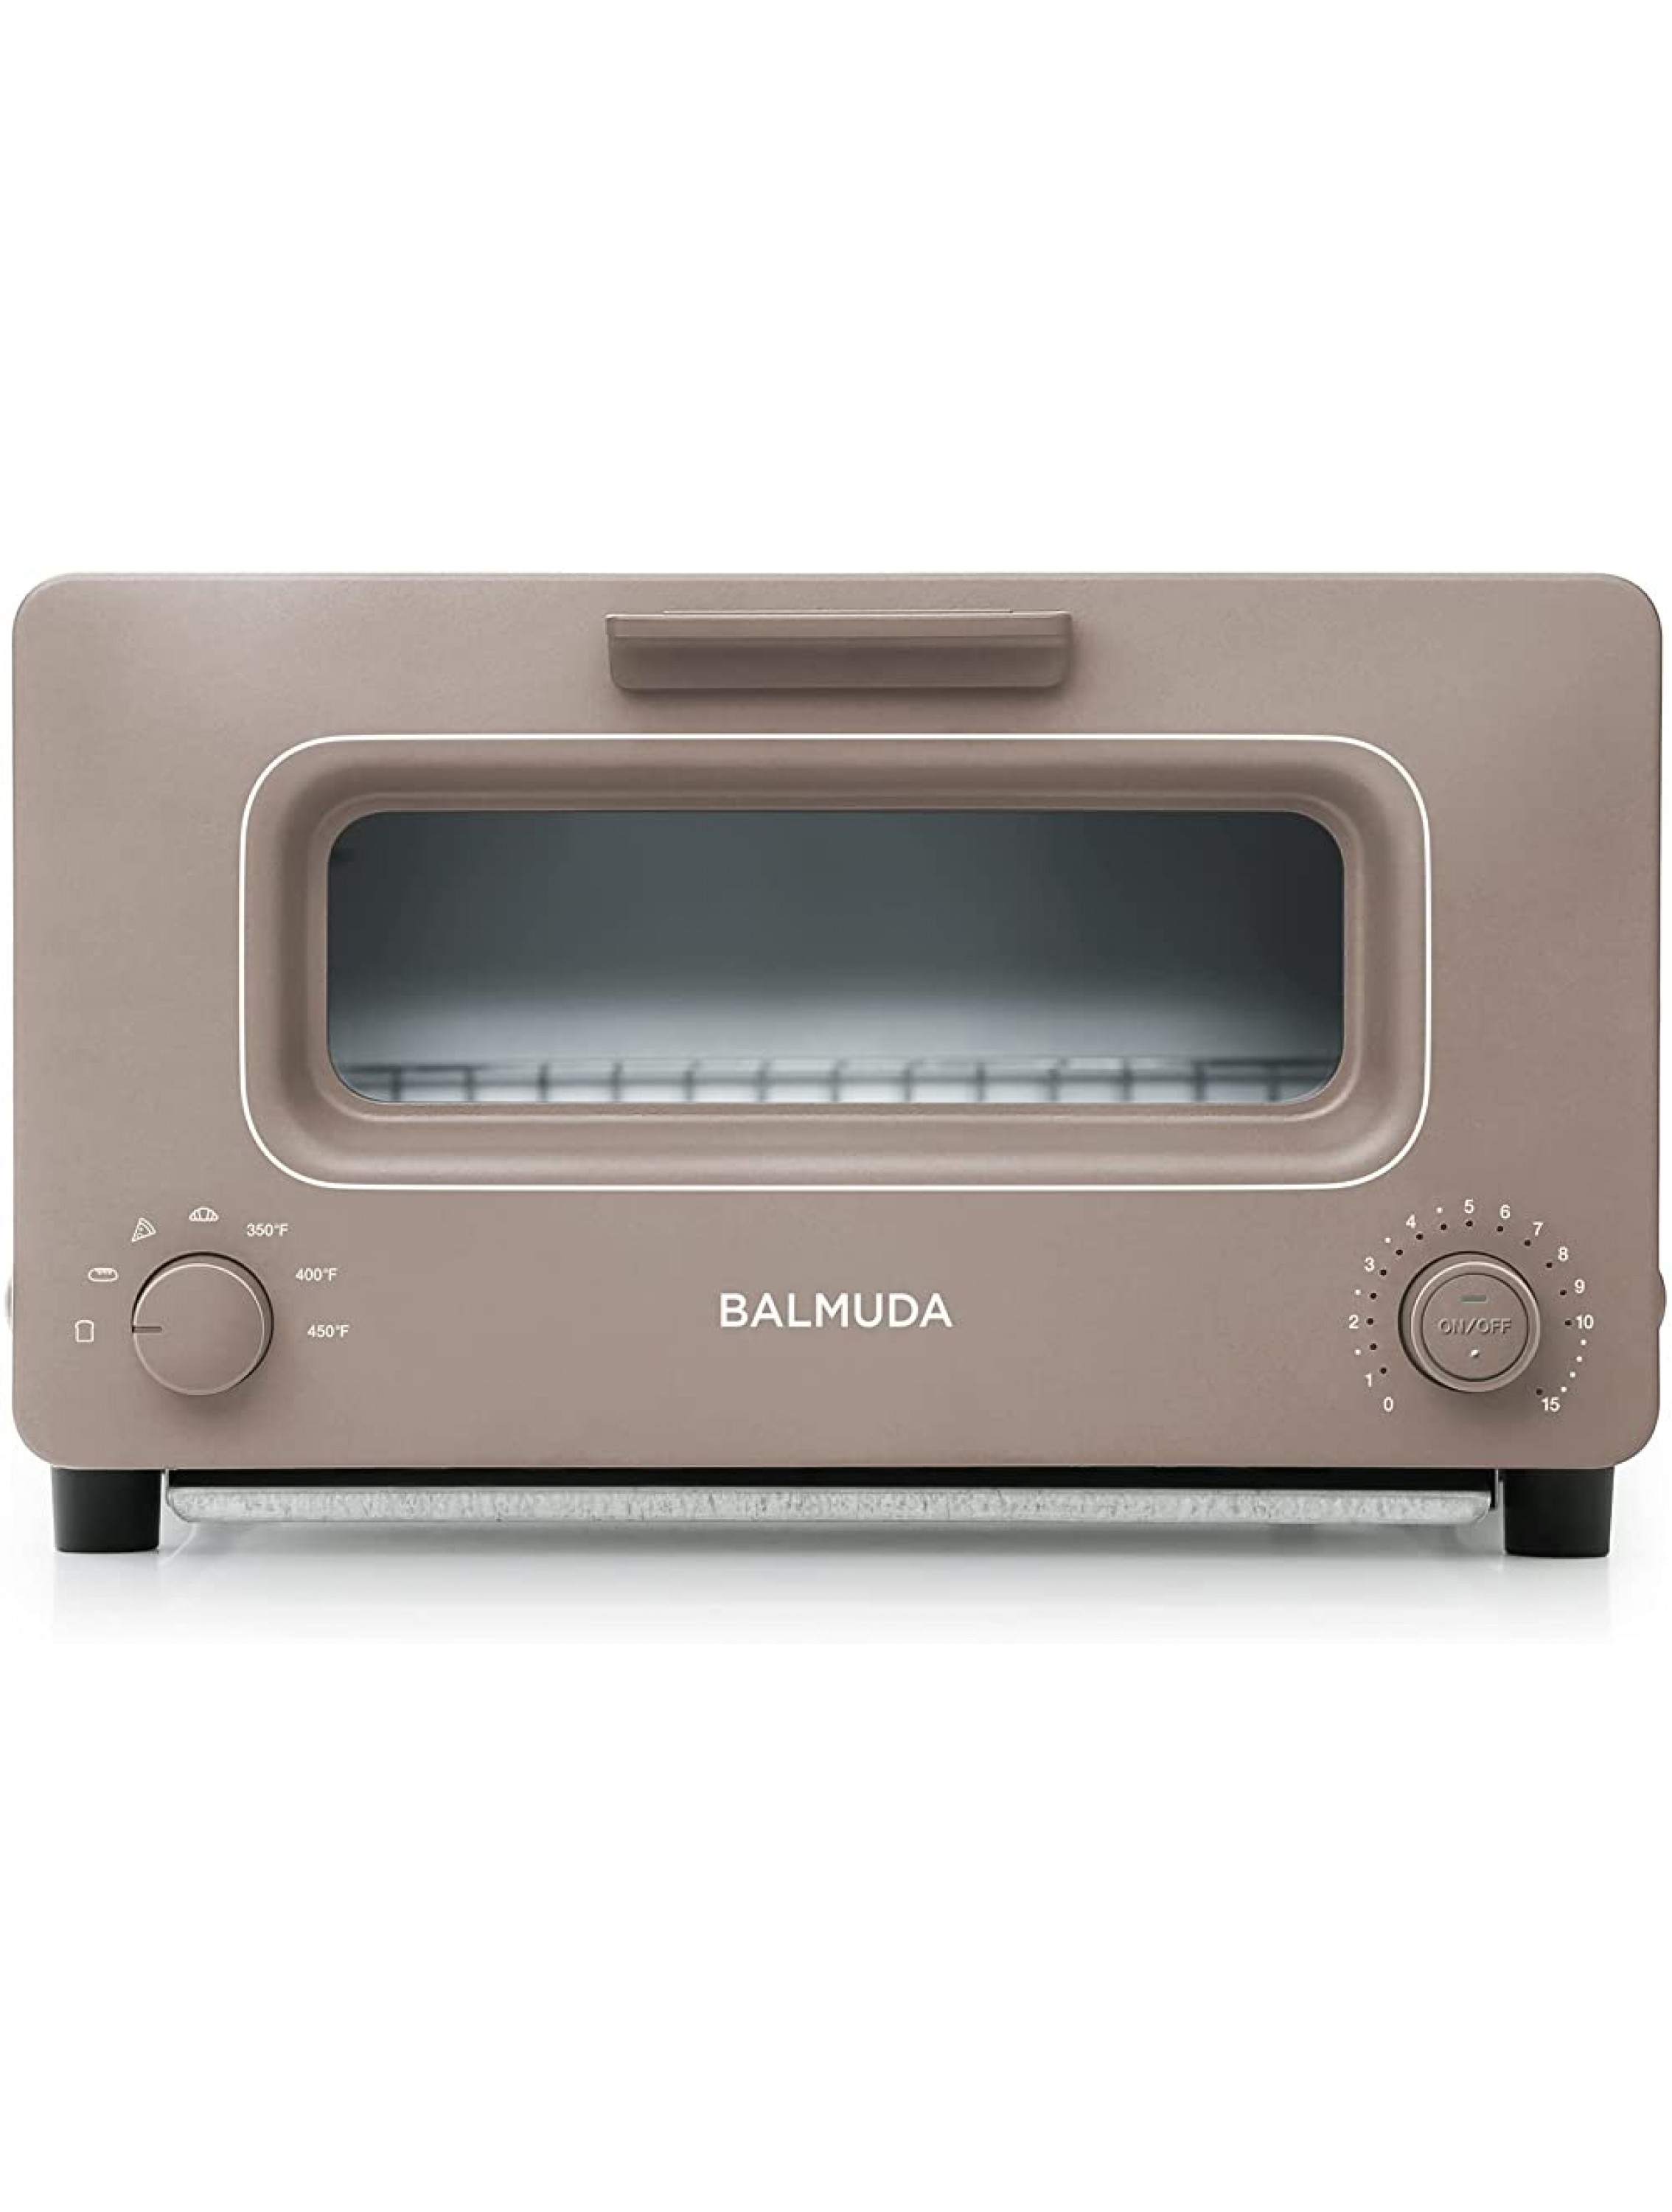 BALMUDA The Toaster | Steam Oven Toaster | 5 Cooking Modes Sandwich Bread Artisan Bread Pizza Pastry Oven | Compact Design | Baking Pan | K01M-WC | Taupe | US Version… - BOIKKNVAU